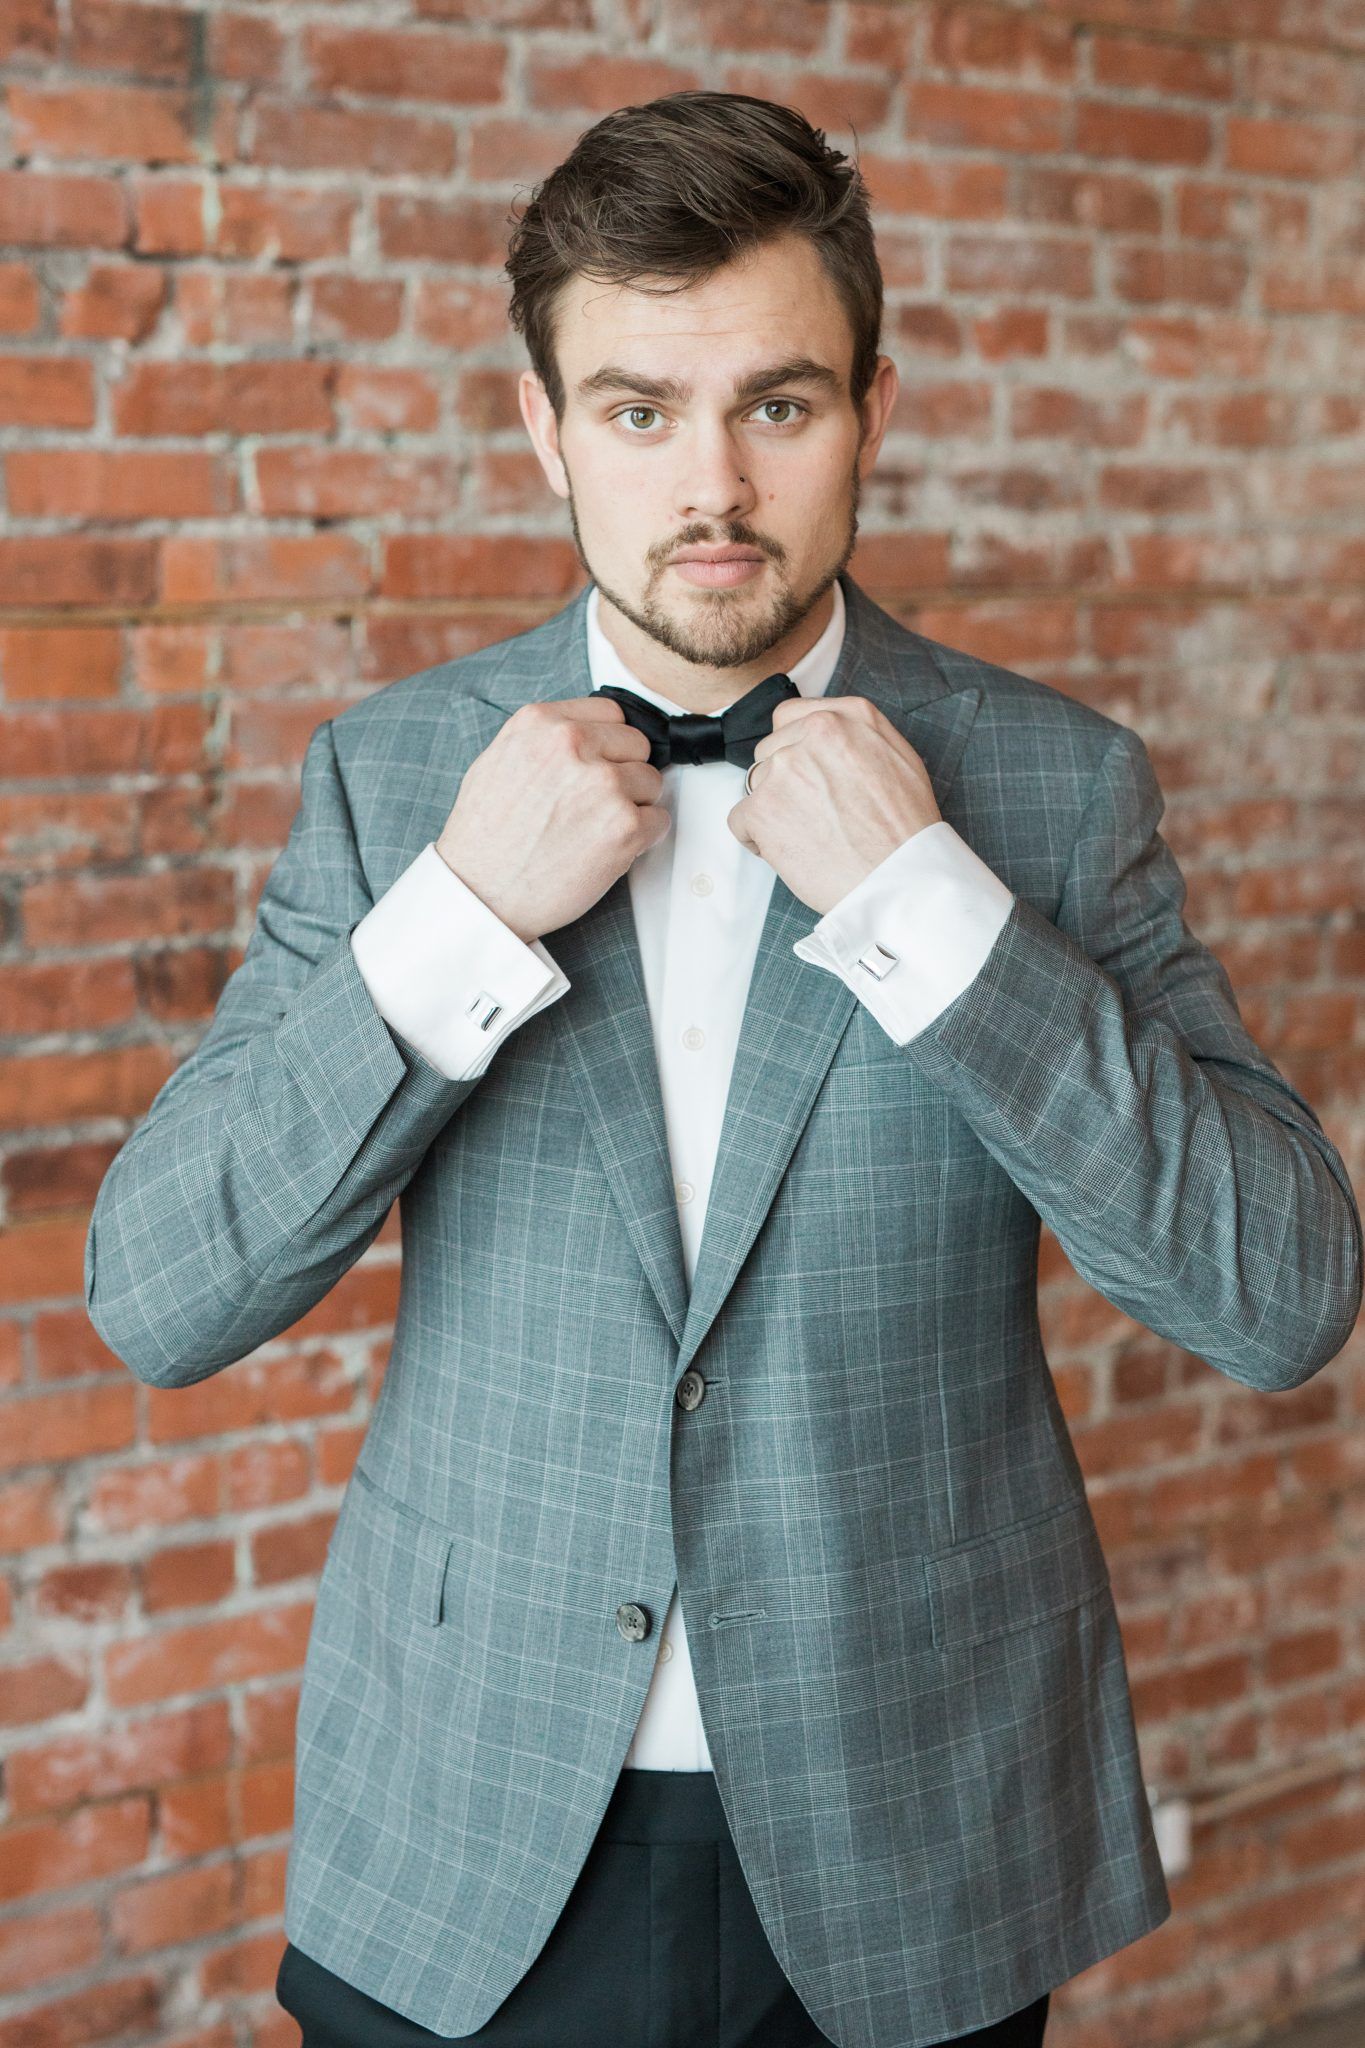 Looking Dapper: 10 Looks for the Modern Groom - on the Bronte Bride Blog, groom style, Calgary Wedding Inspiration Blog, grey patterned suit